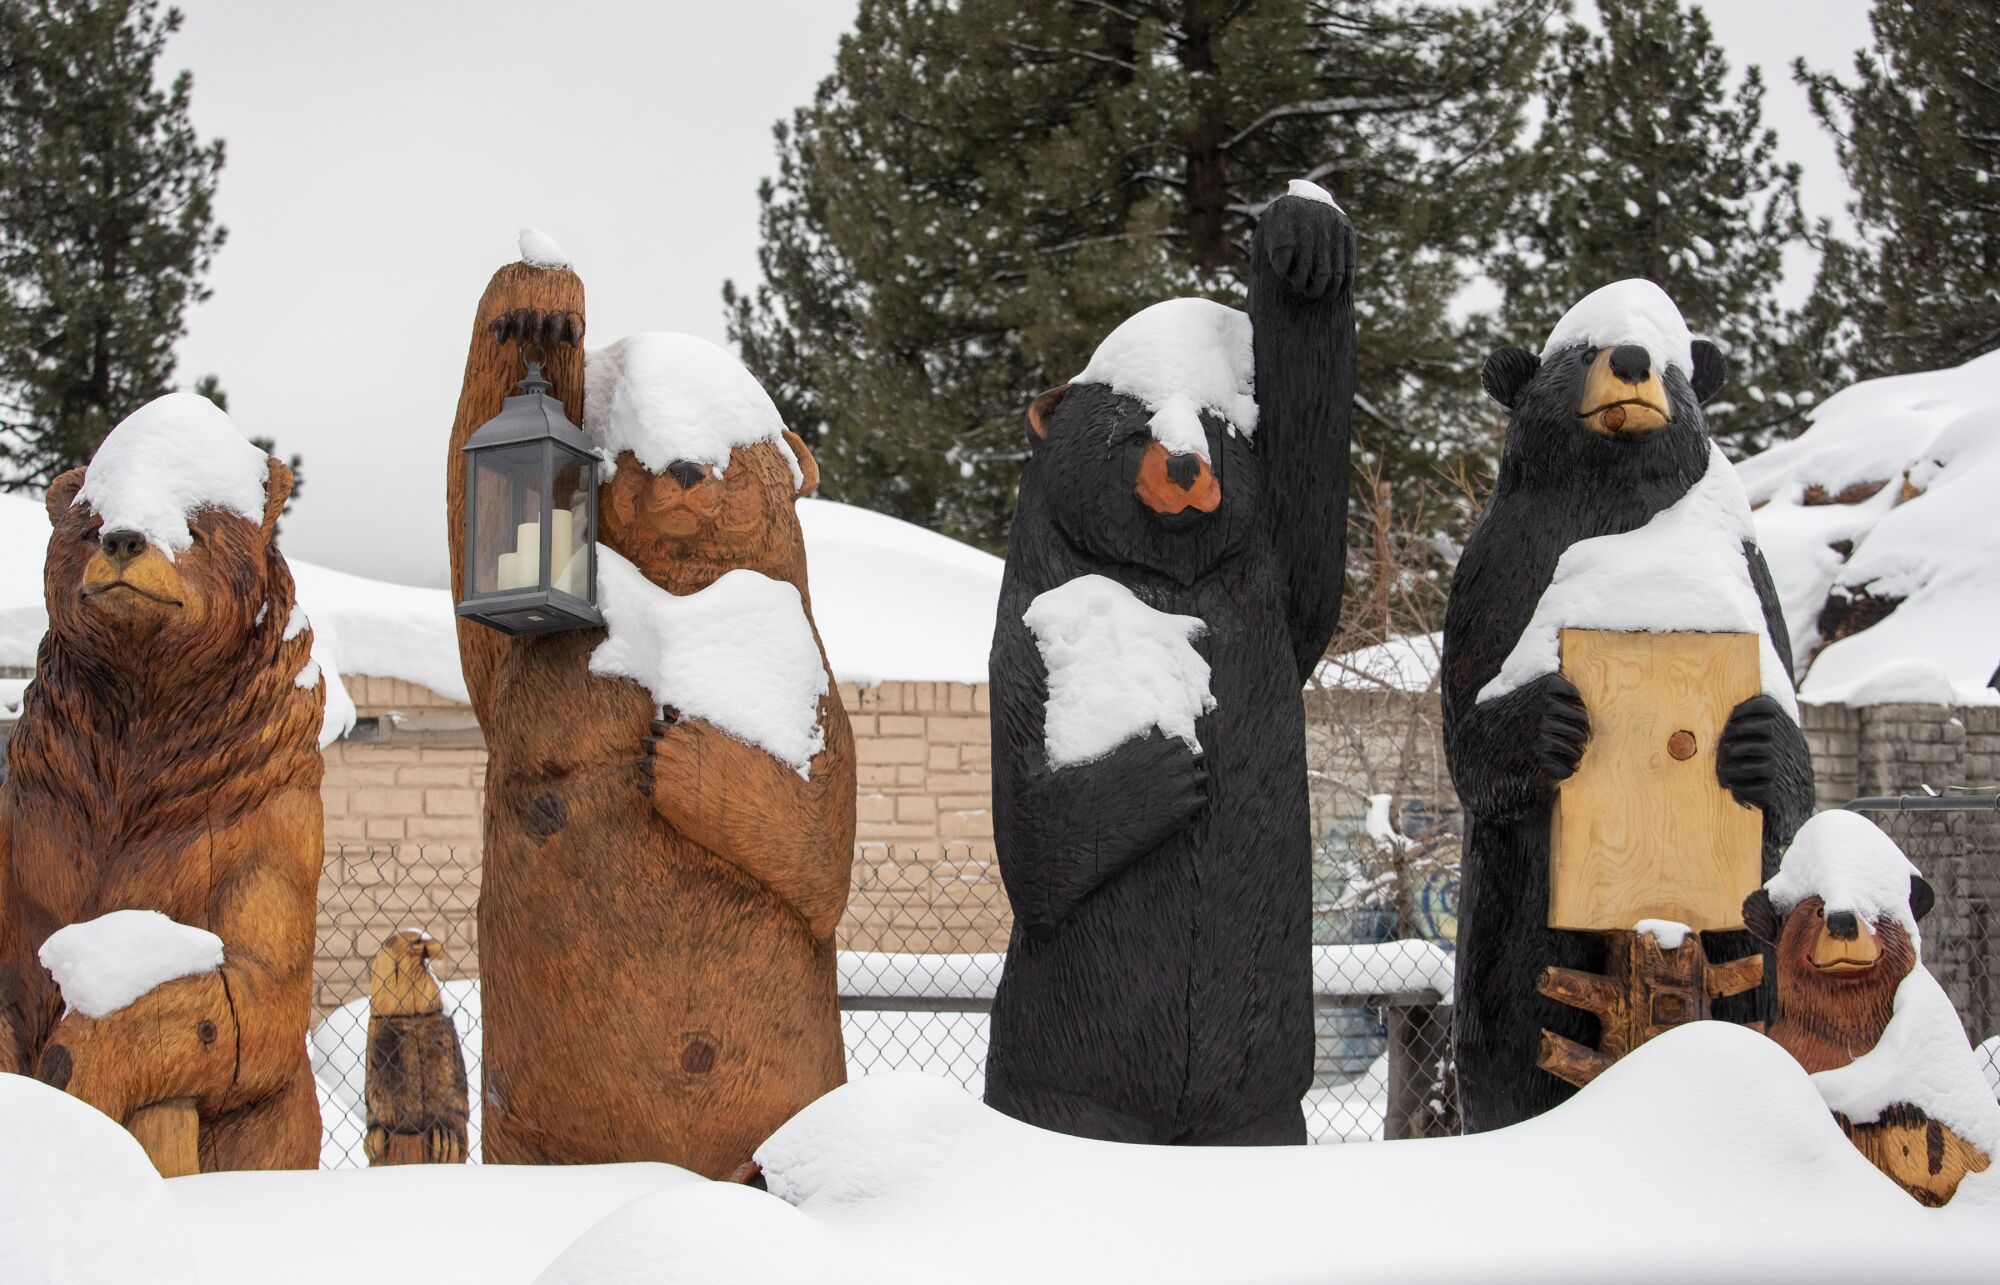 Carved wooden bears are covered in snow in Big Bear.